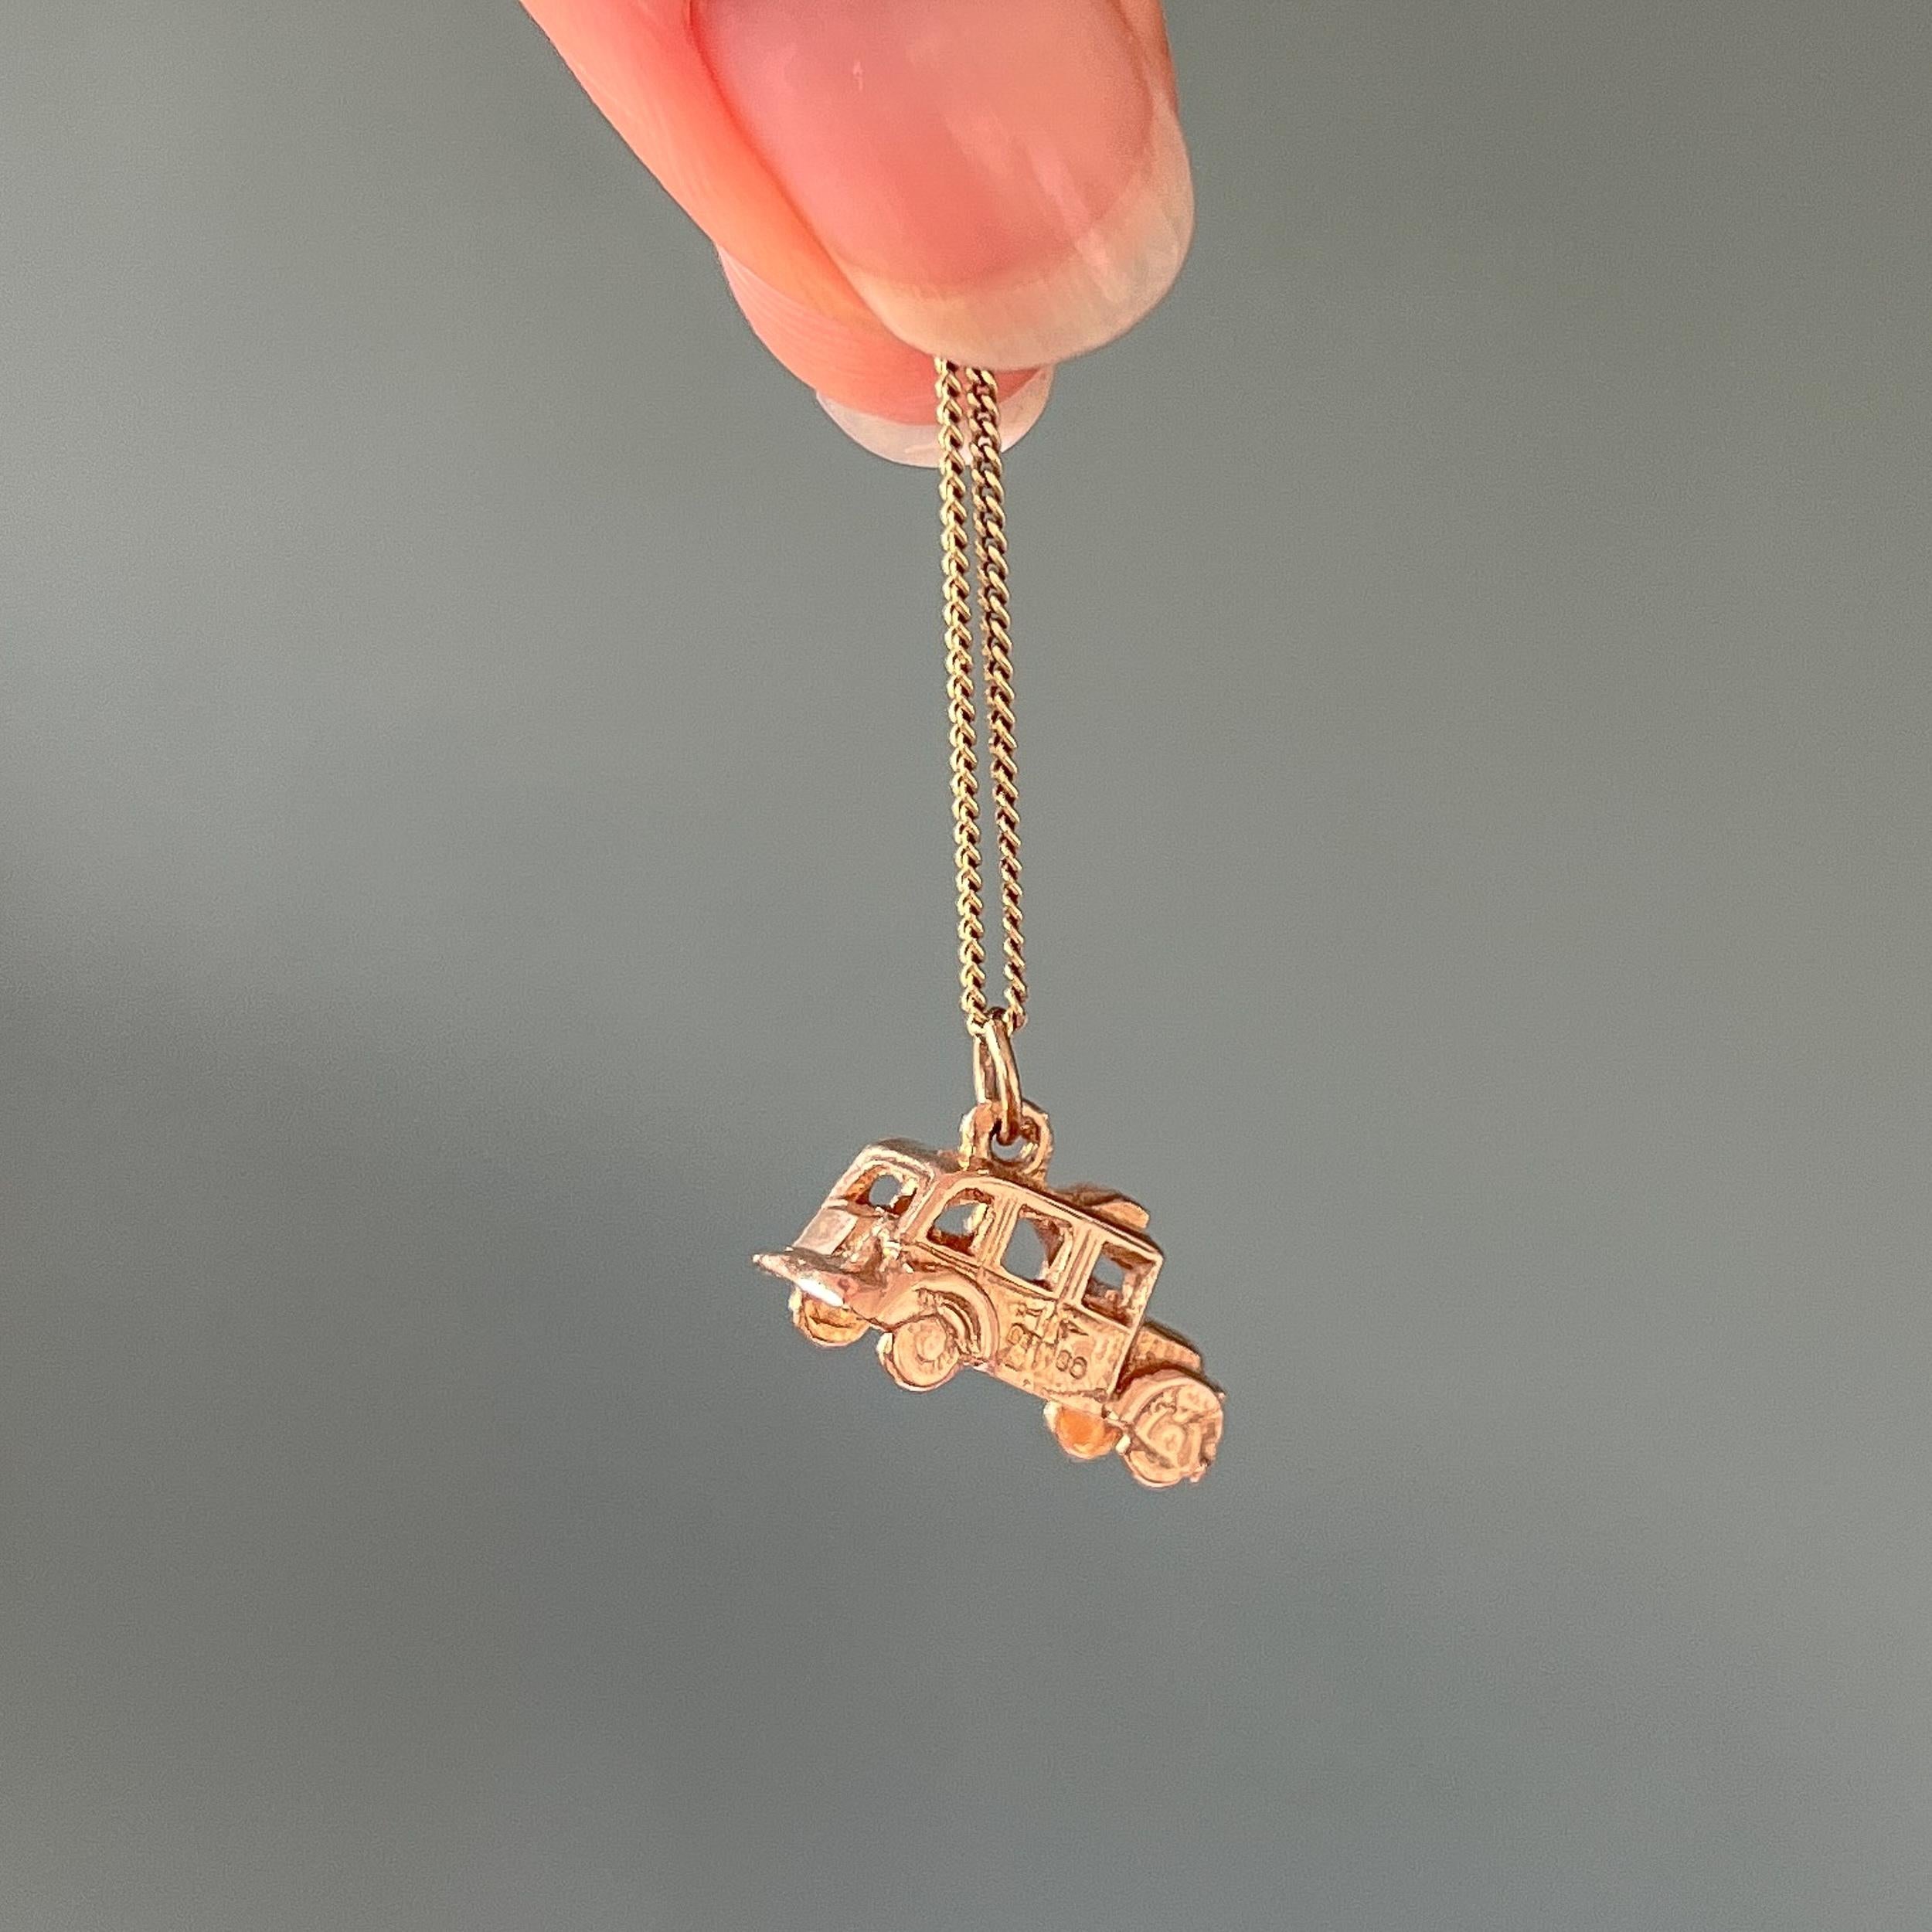 This is a vintage 9 karat yellow gold English taxi cab charm pendant. The charm is nicely detailed with the taxi sign on the roof and the grill in the front. It has open windows and door on the passengers seat. The bottom and inside is open and not